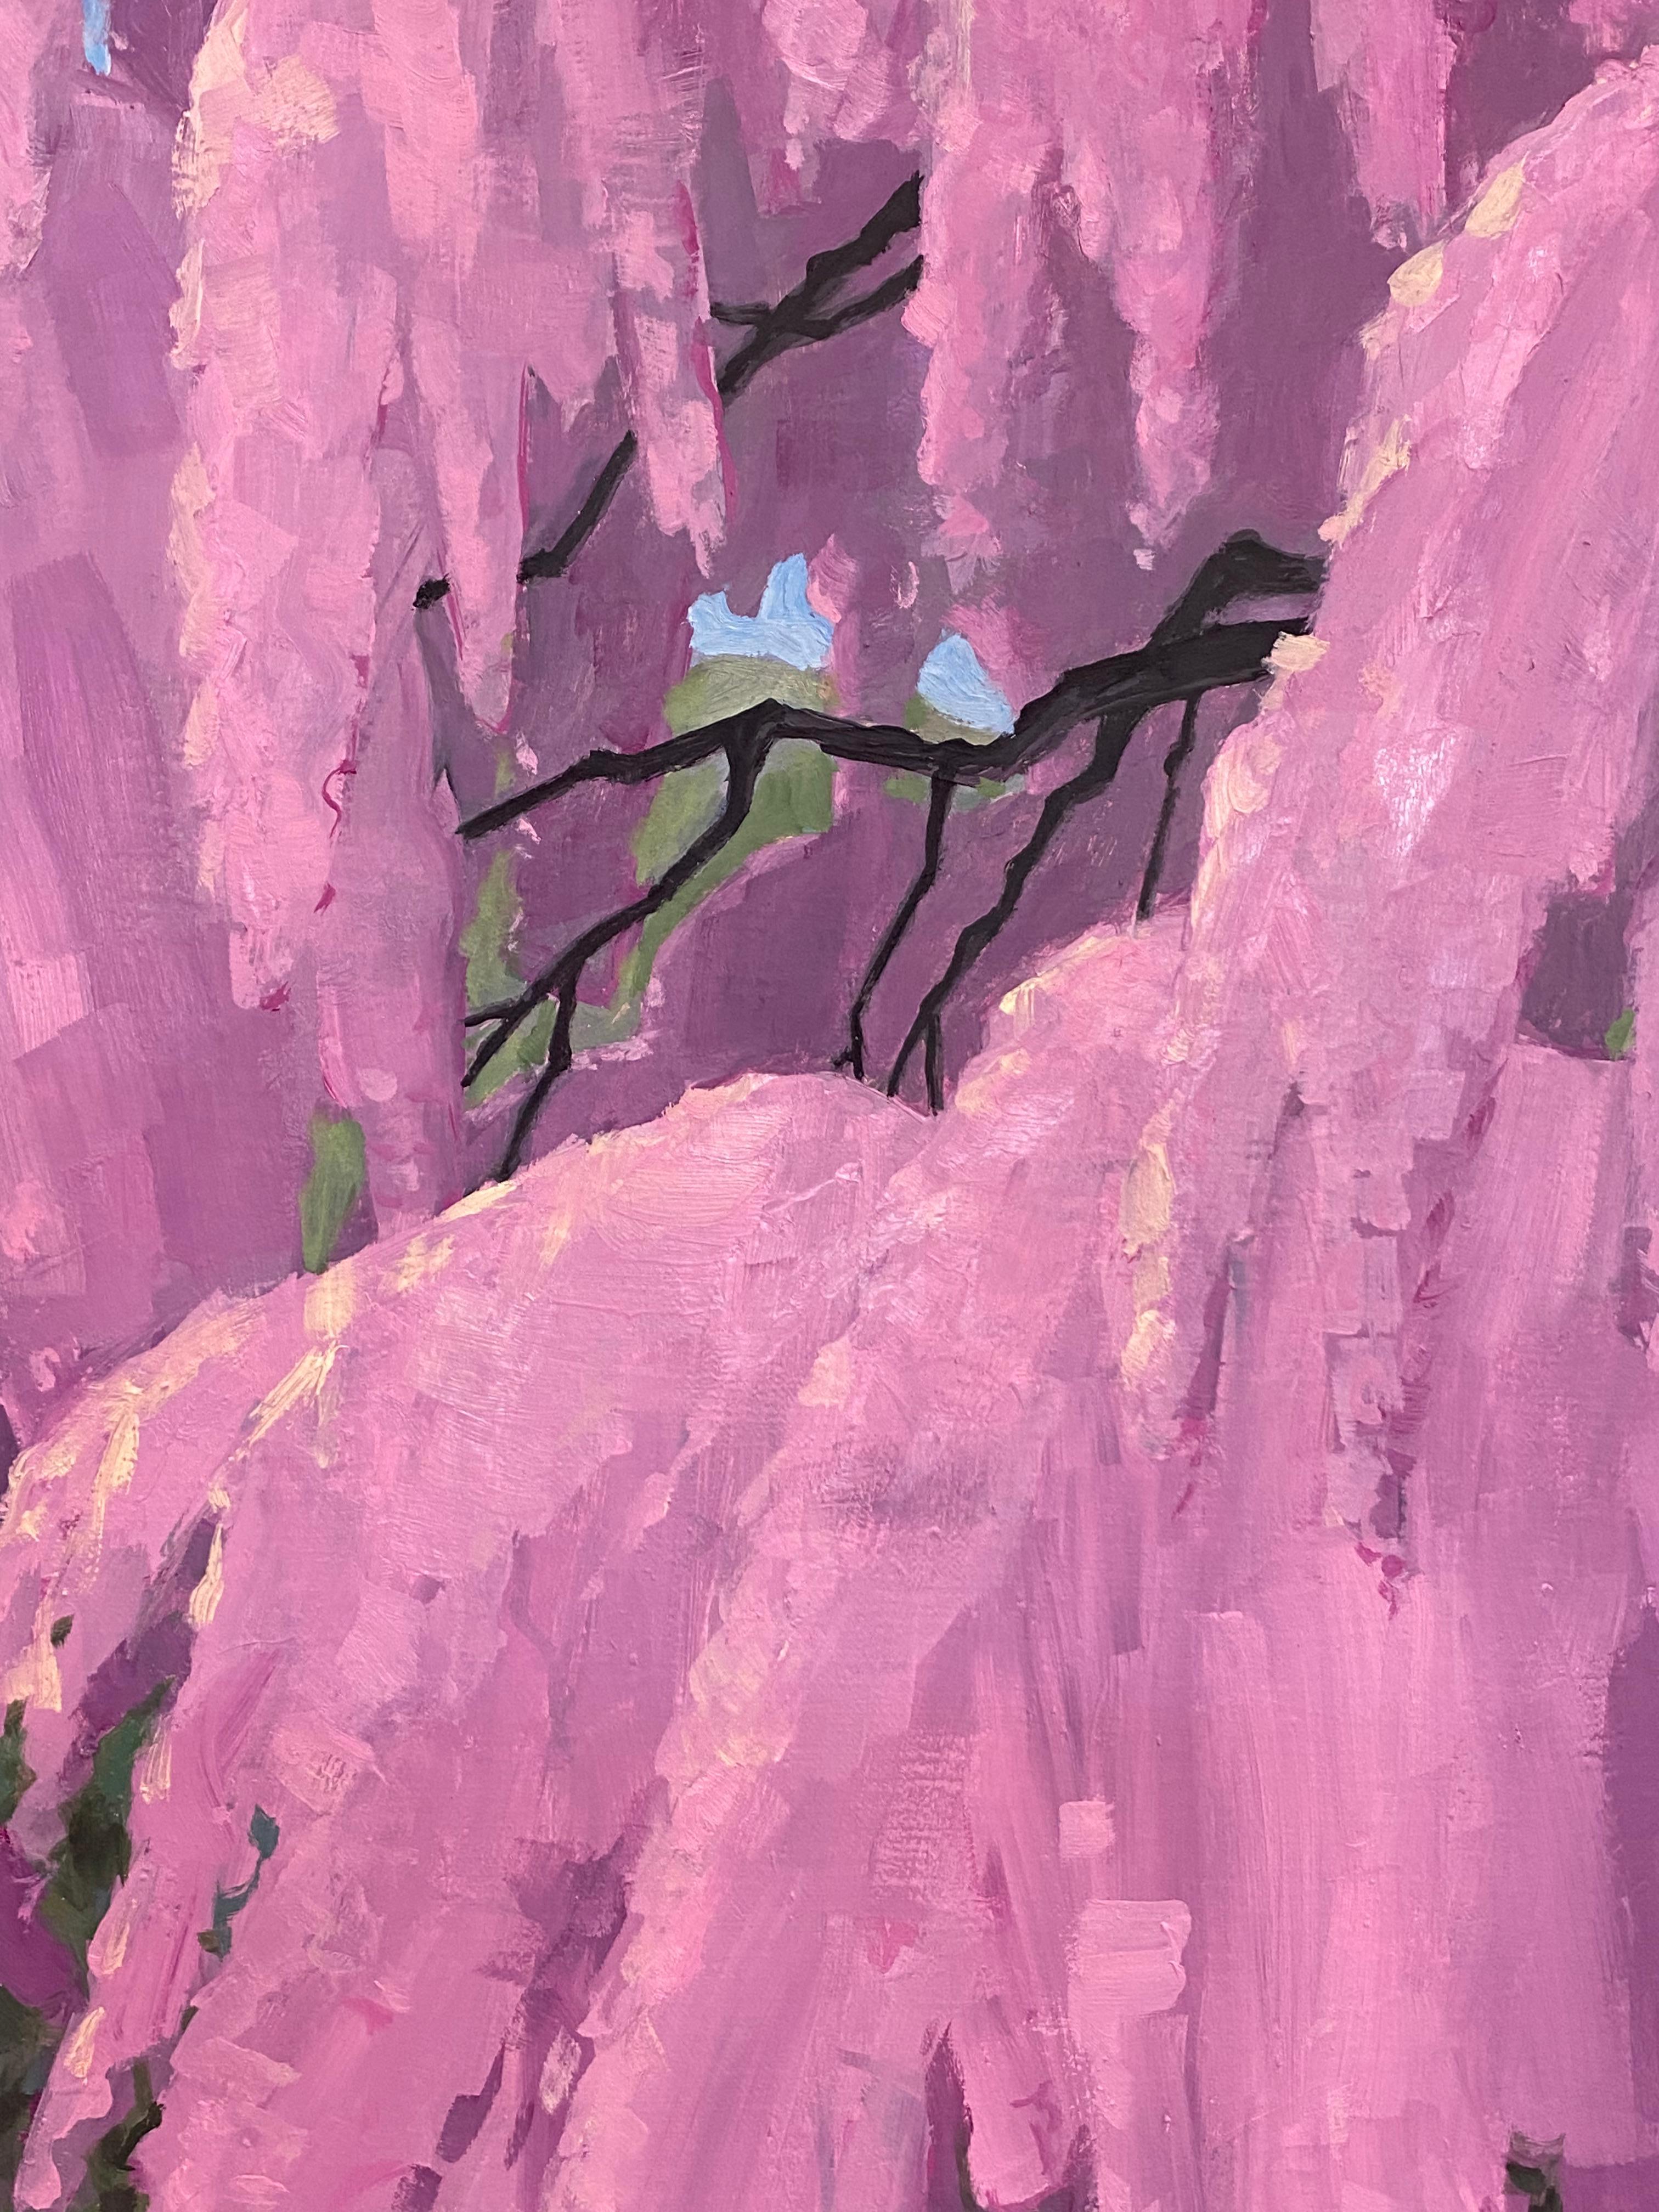 A cheerful pink weeping cherry blossom is in full bloom, its blossoming branches hanging gracefully over a pathway in a verdant park in this peaceful springtime landscape painting by KK Kozik. Signed, dated, and titled on verso.

KK Kozik is a